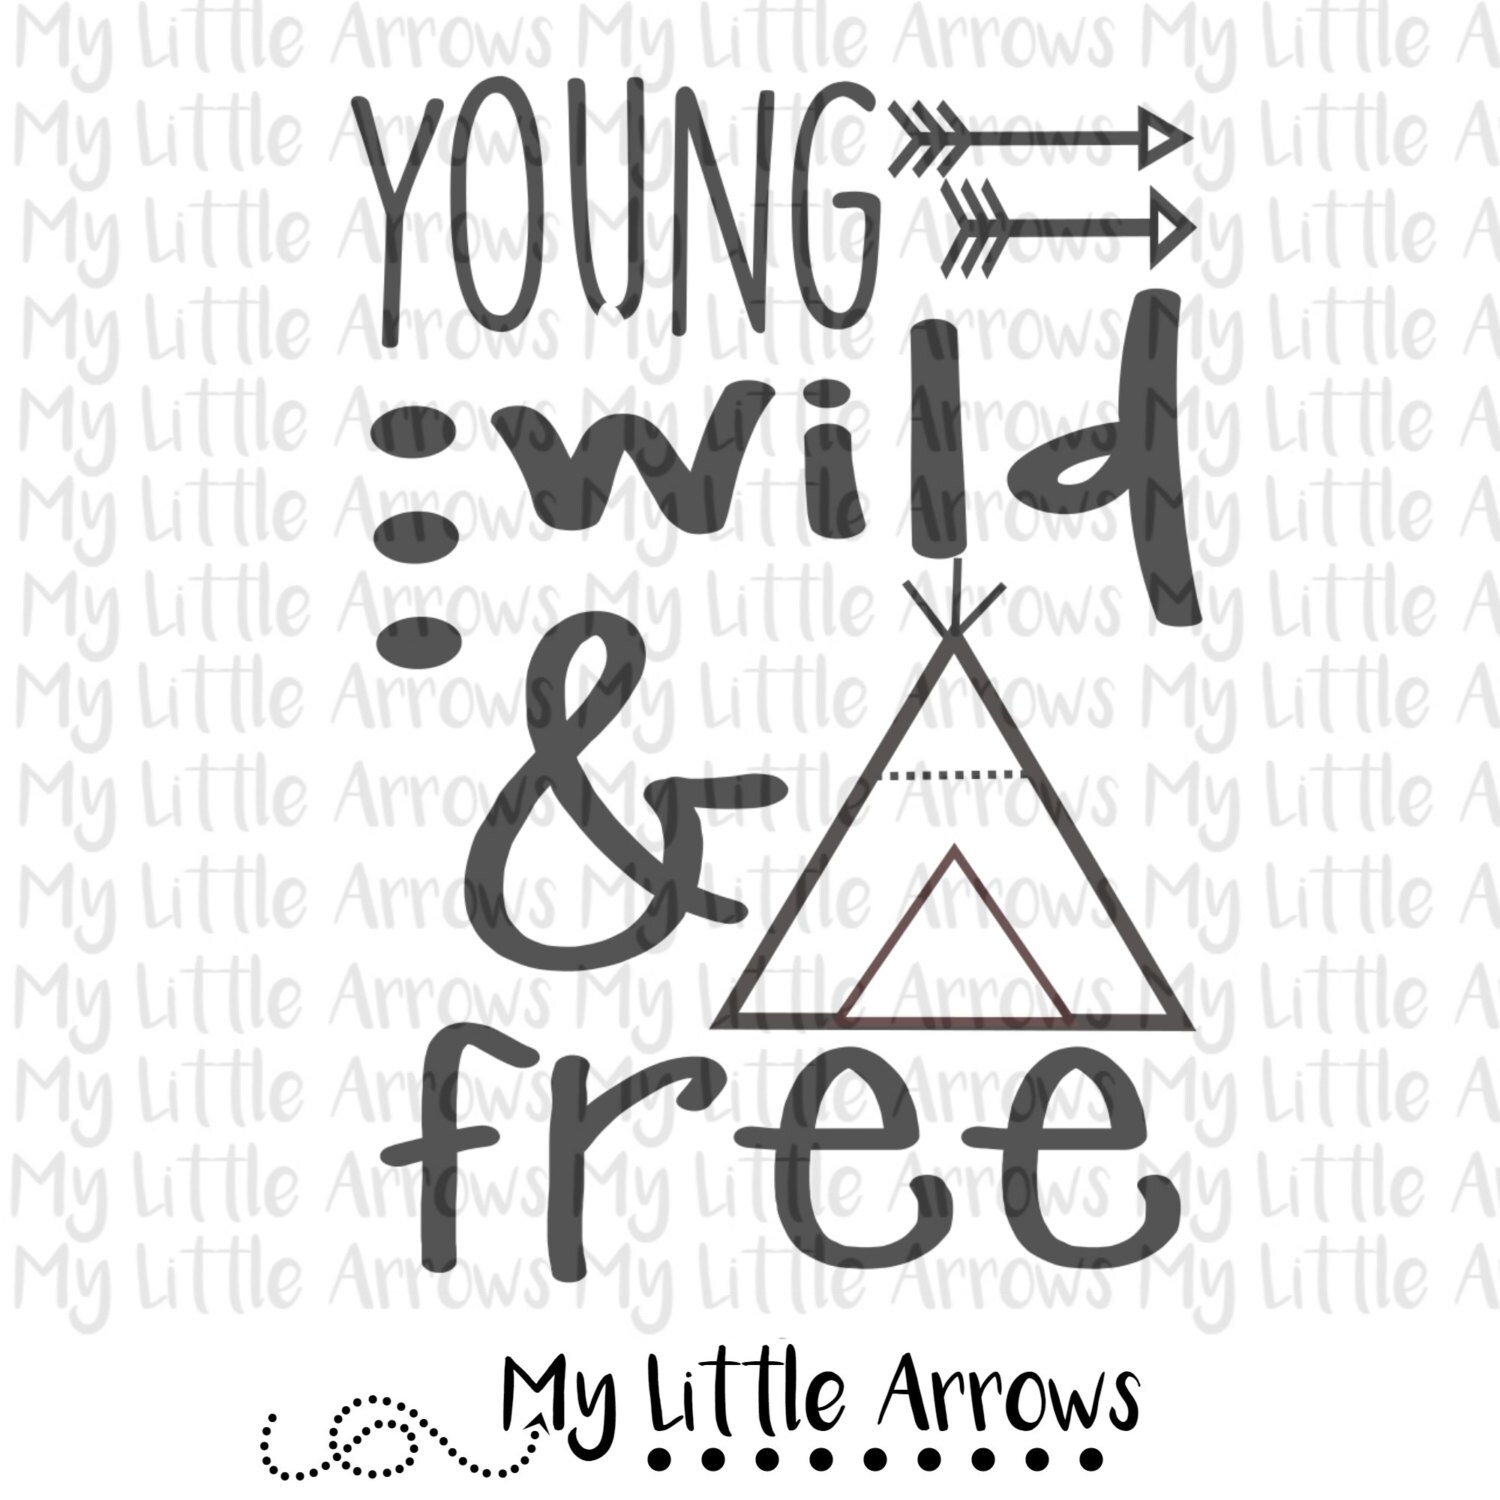 Download Young wild & free SVG DXF EPS png Files for Cutting